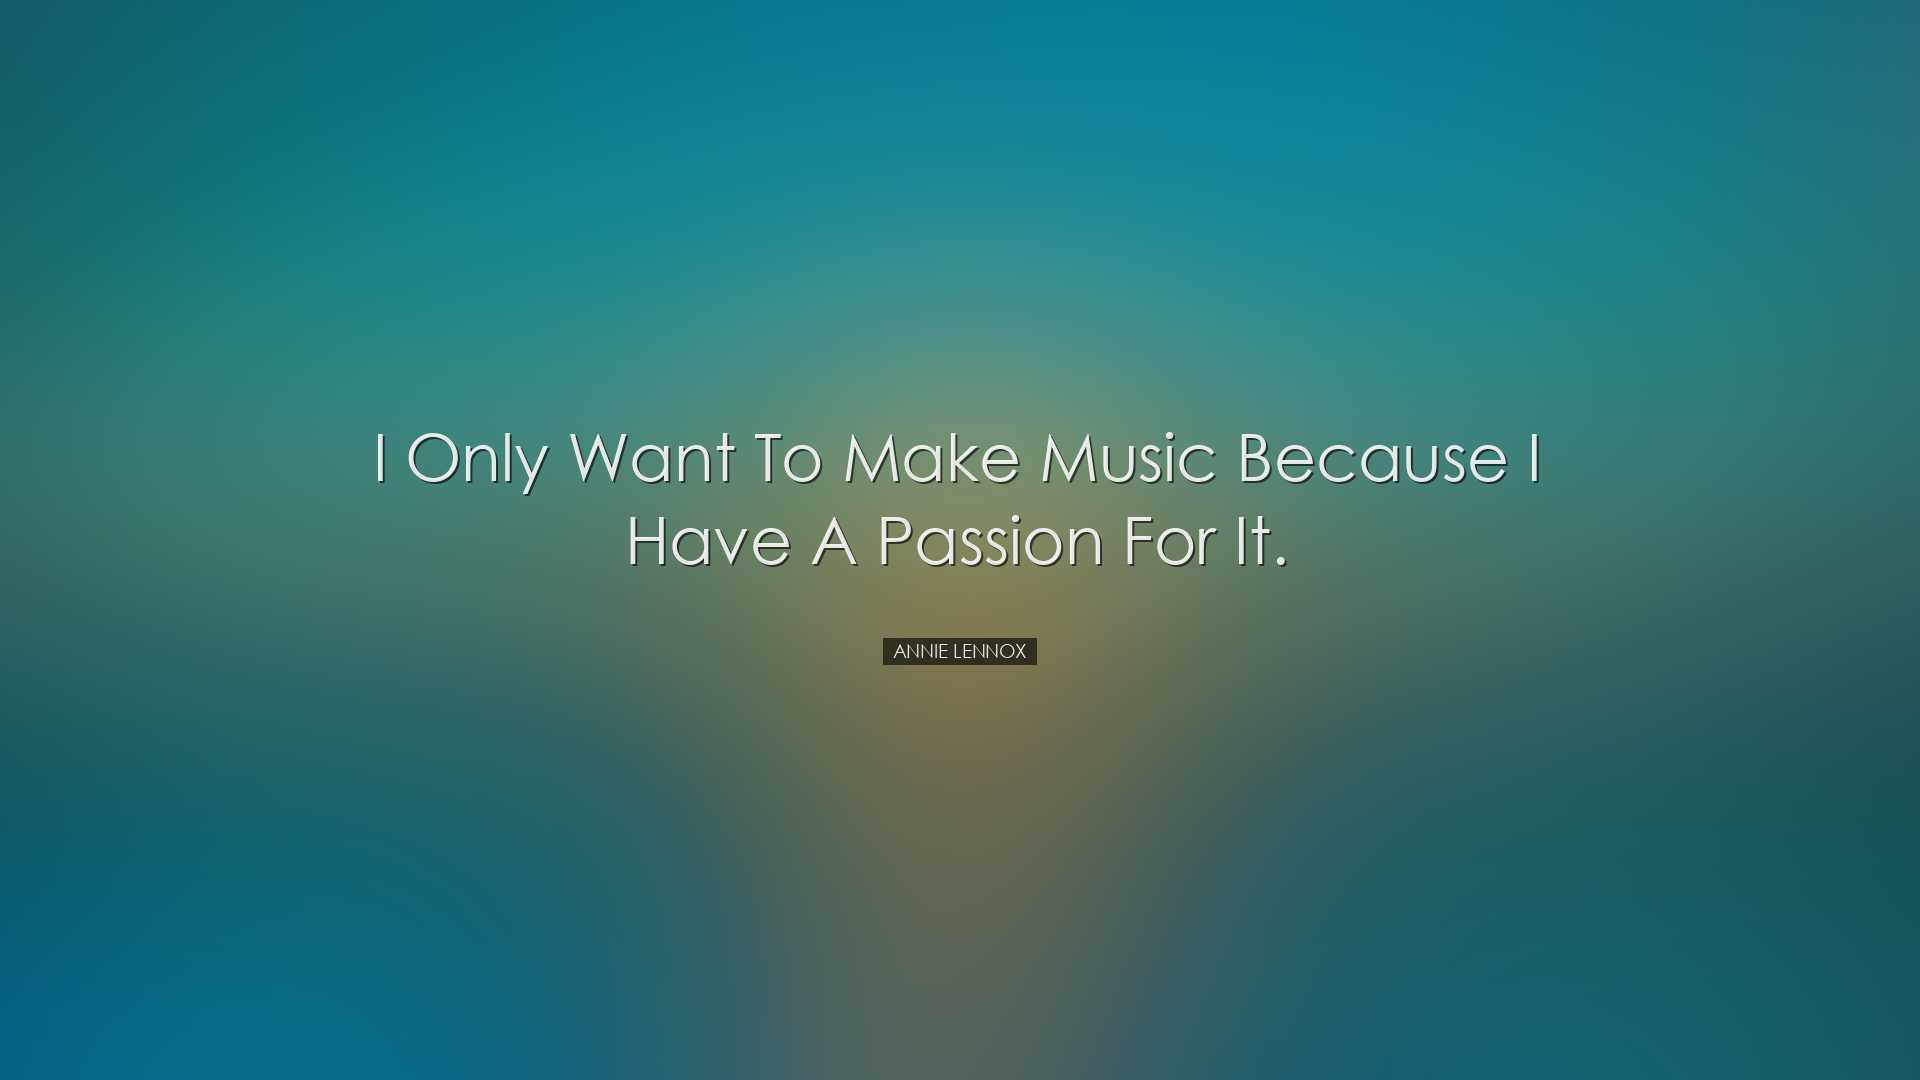 I only want to make music because I have a passion for it. - Annie